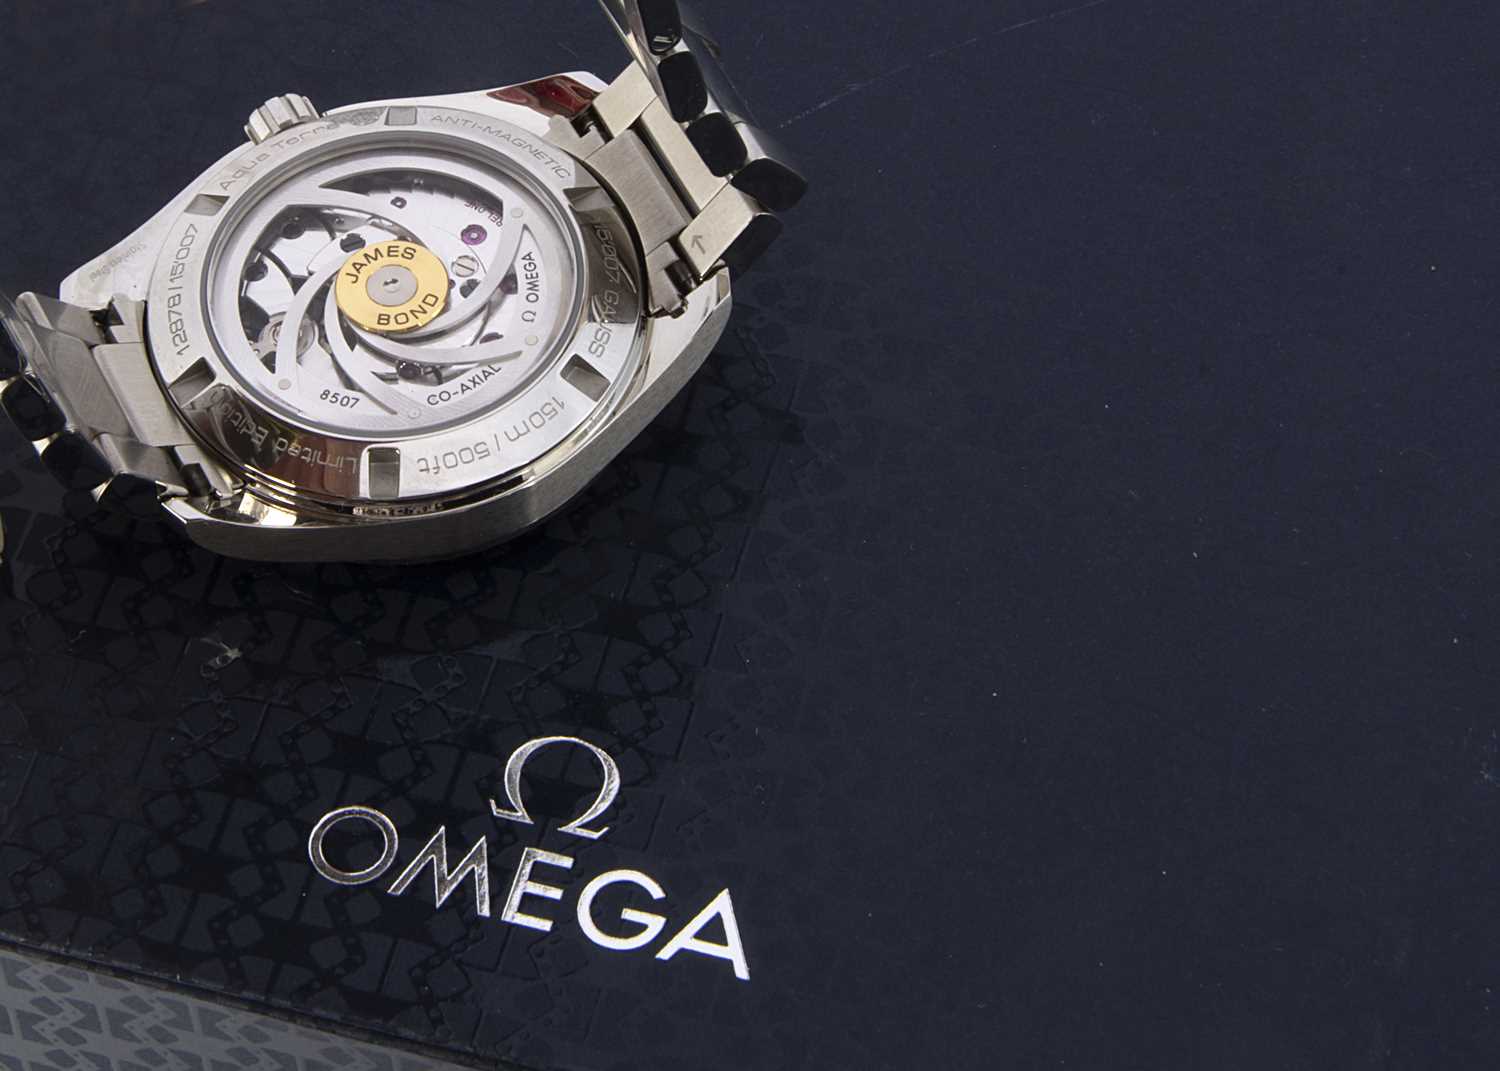 A modern Limited Edition Omega James Bond 007 Spectre Seamaster Master Co-Axial Chronometer automati - Image 12 of 12